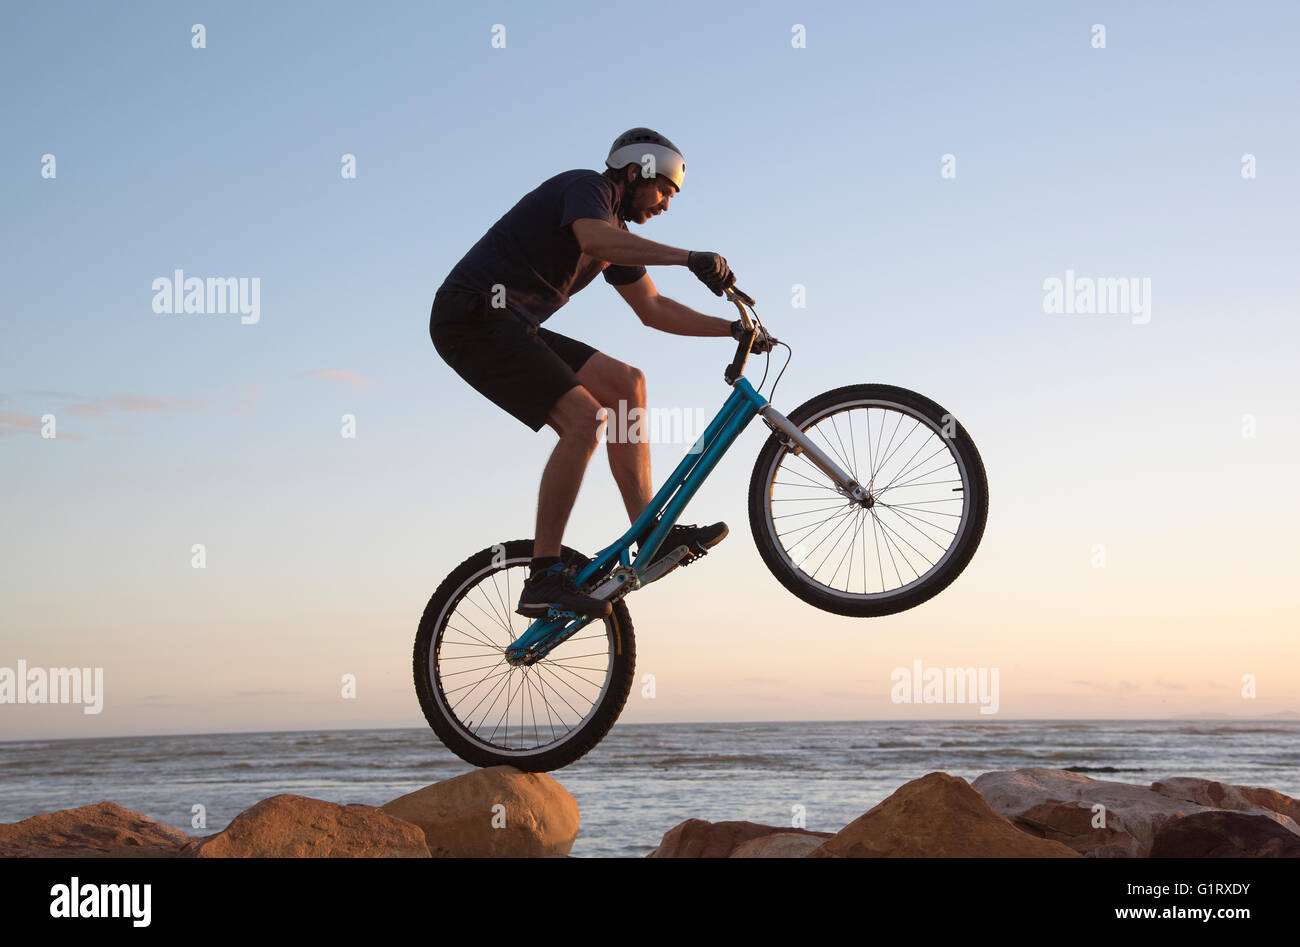 THE STRAND WESTERN CAPE SOUTH AFRICA. A mountain bike rider skillfully  riding over rocks on the shoreline at The Strand beach Stock Photo - Alamy